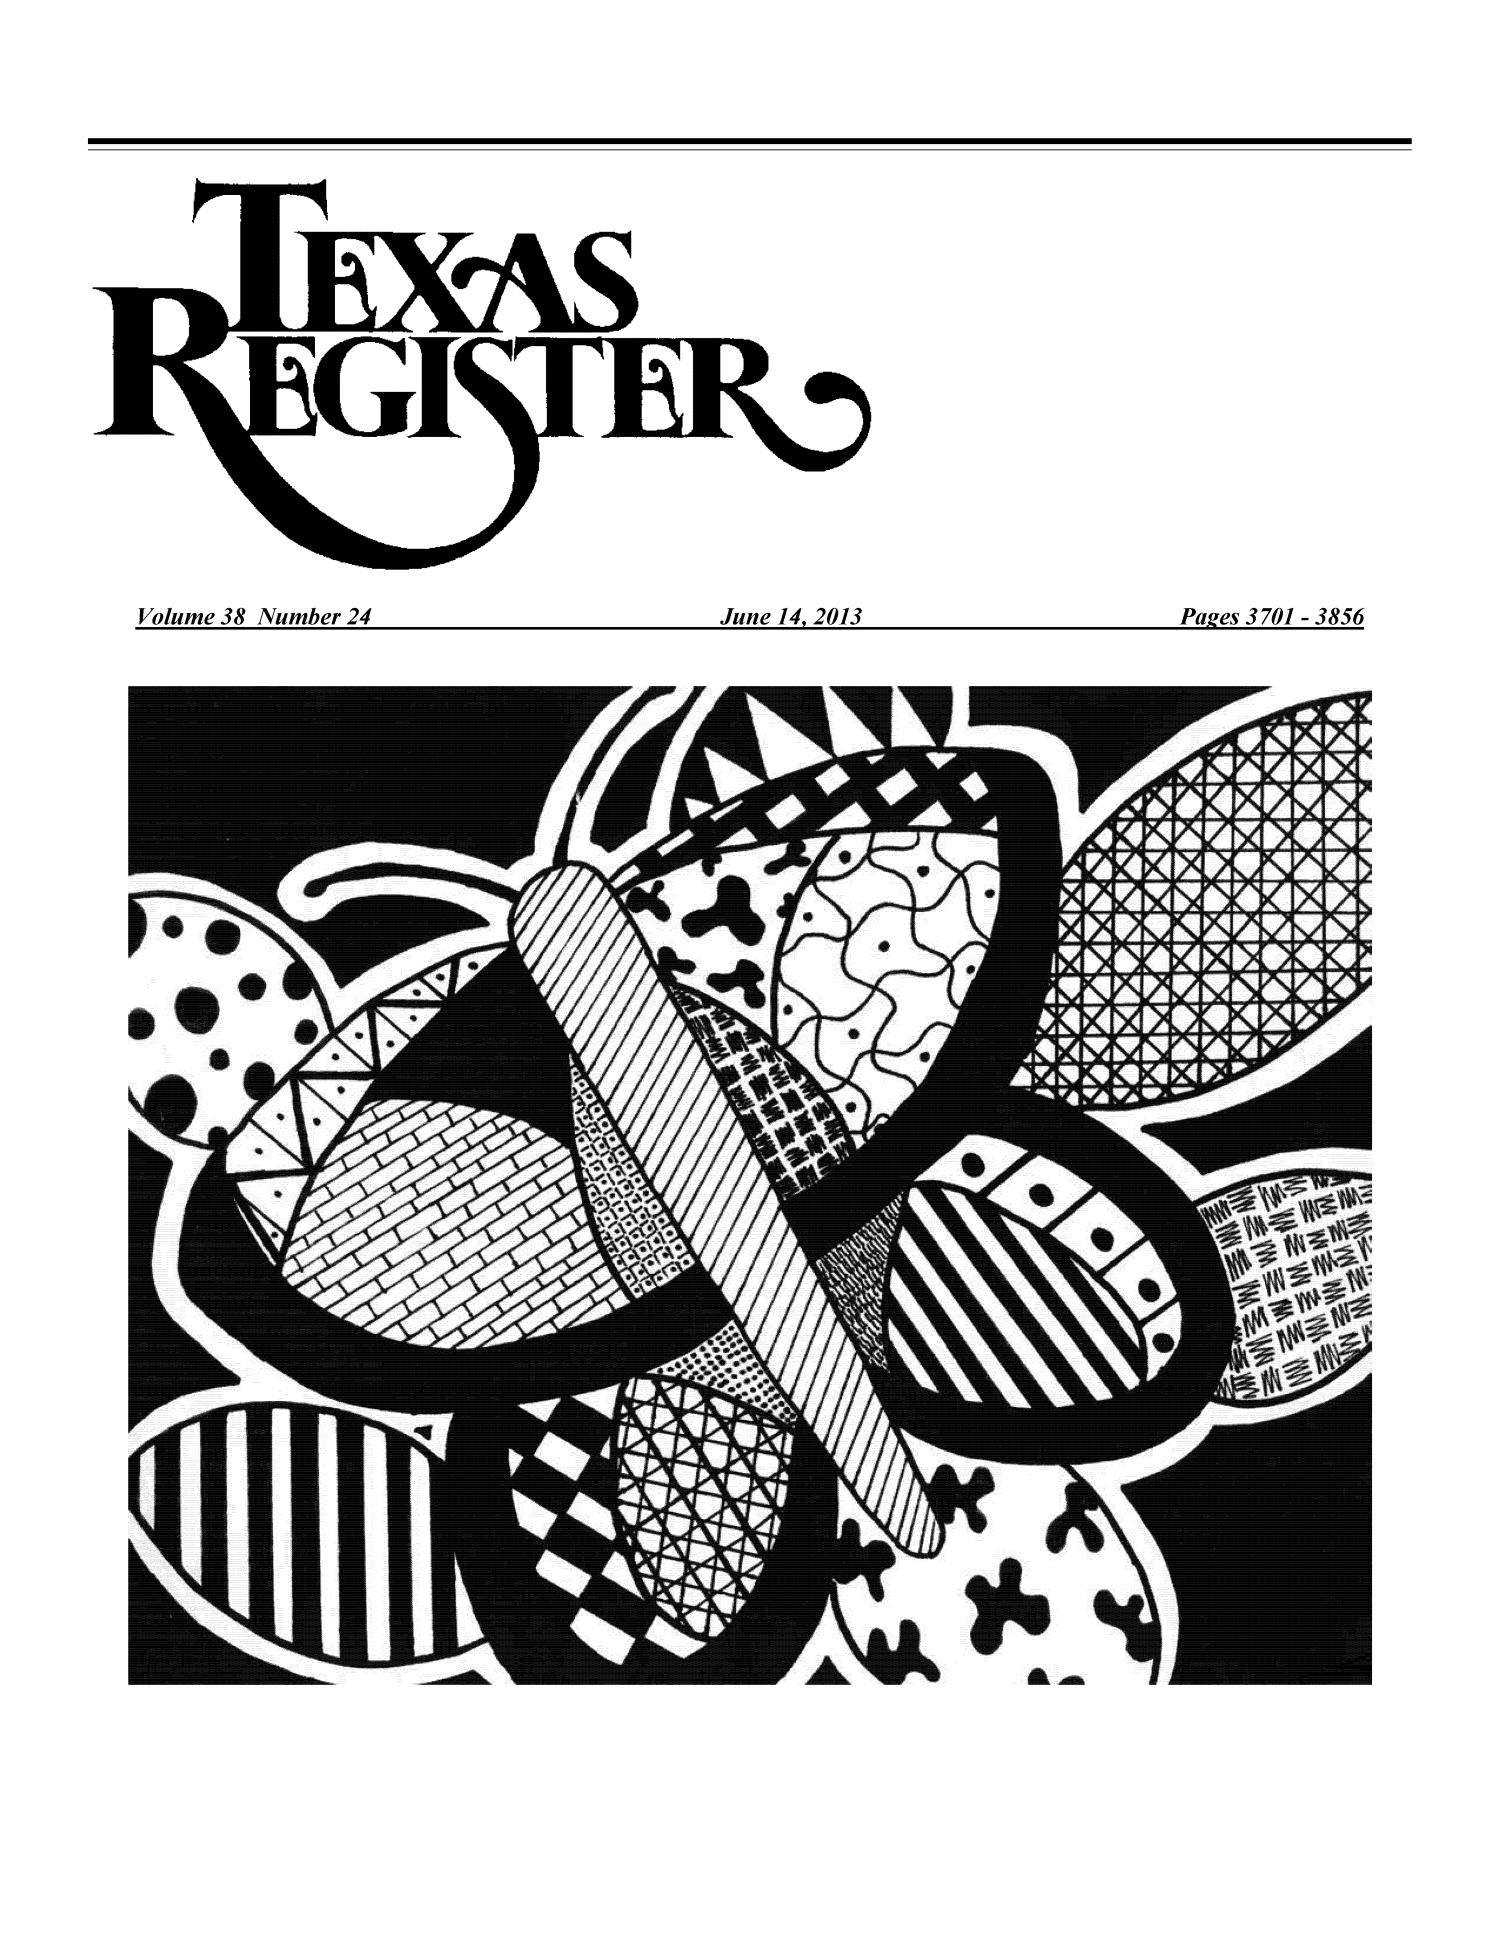 Texas Register, Volume 38, Number 24, Pages 3701-3856, June 14, 2013
                                                
                                                    Title Page
                                                